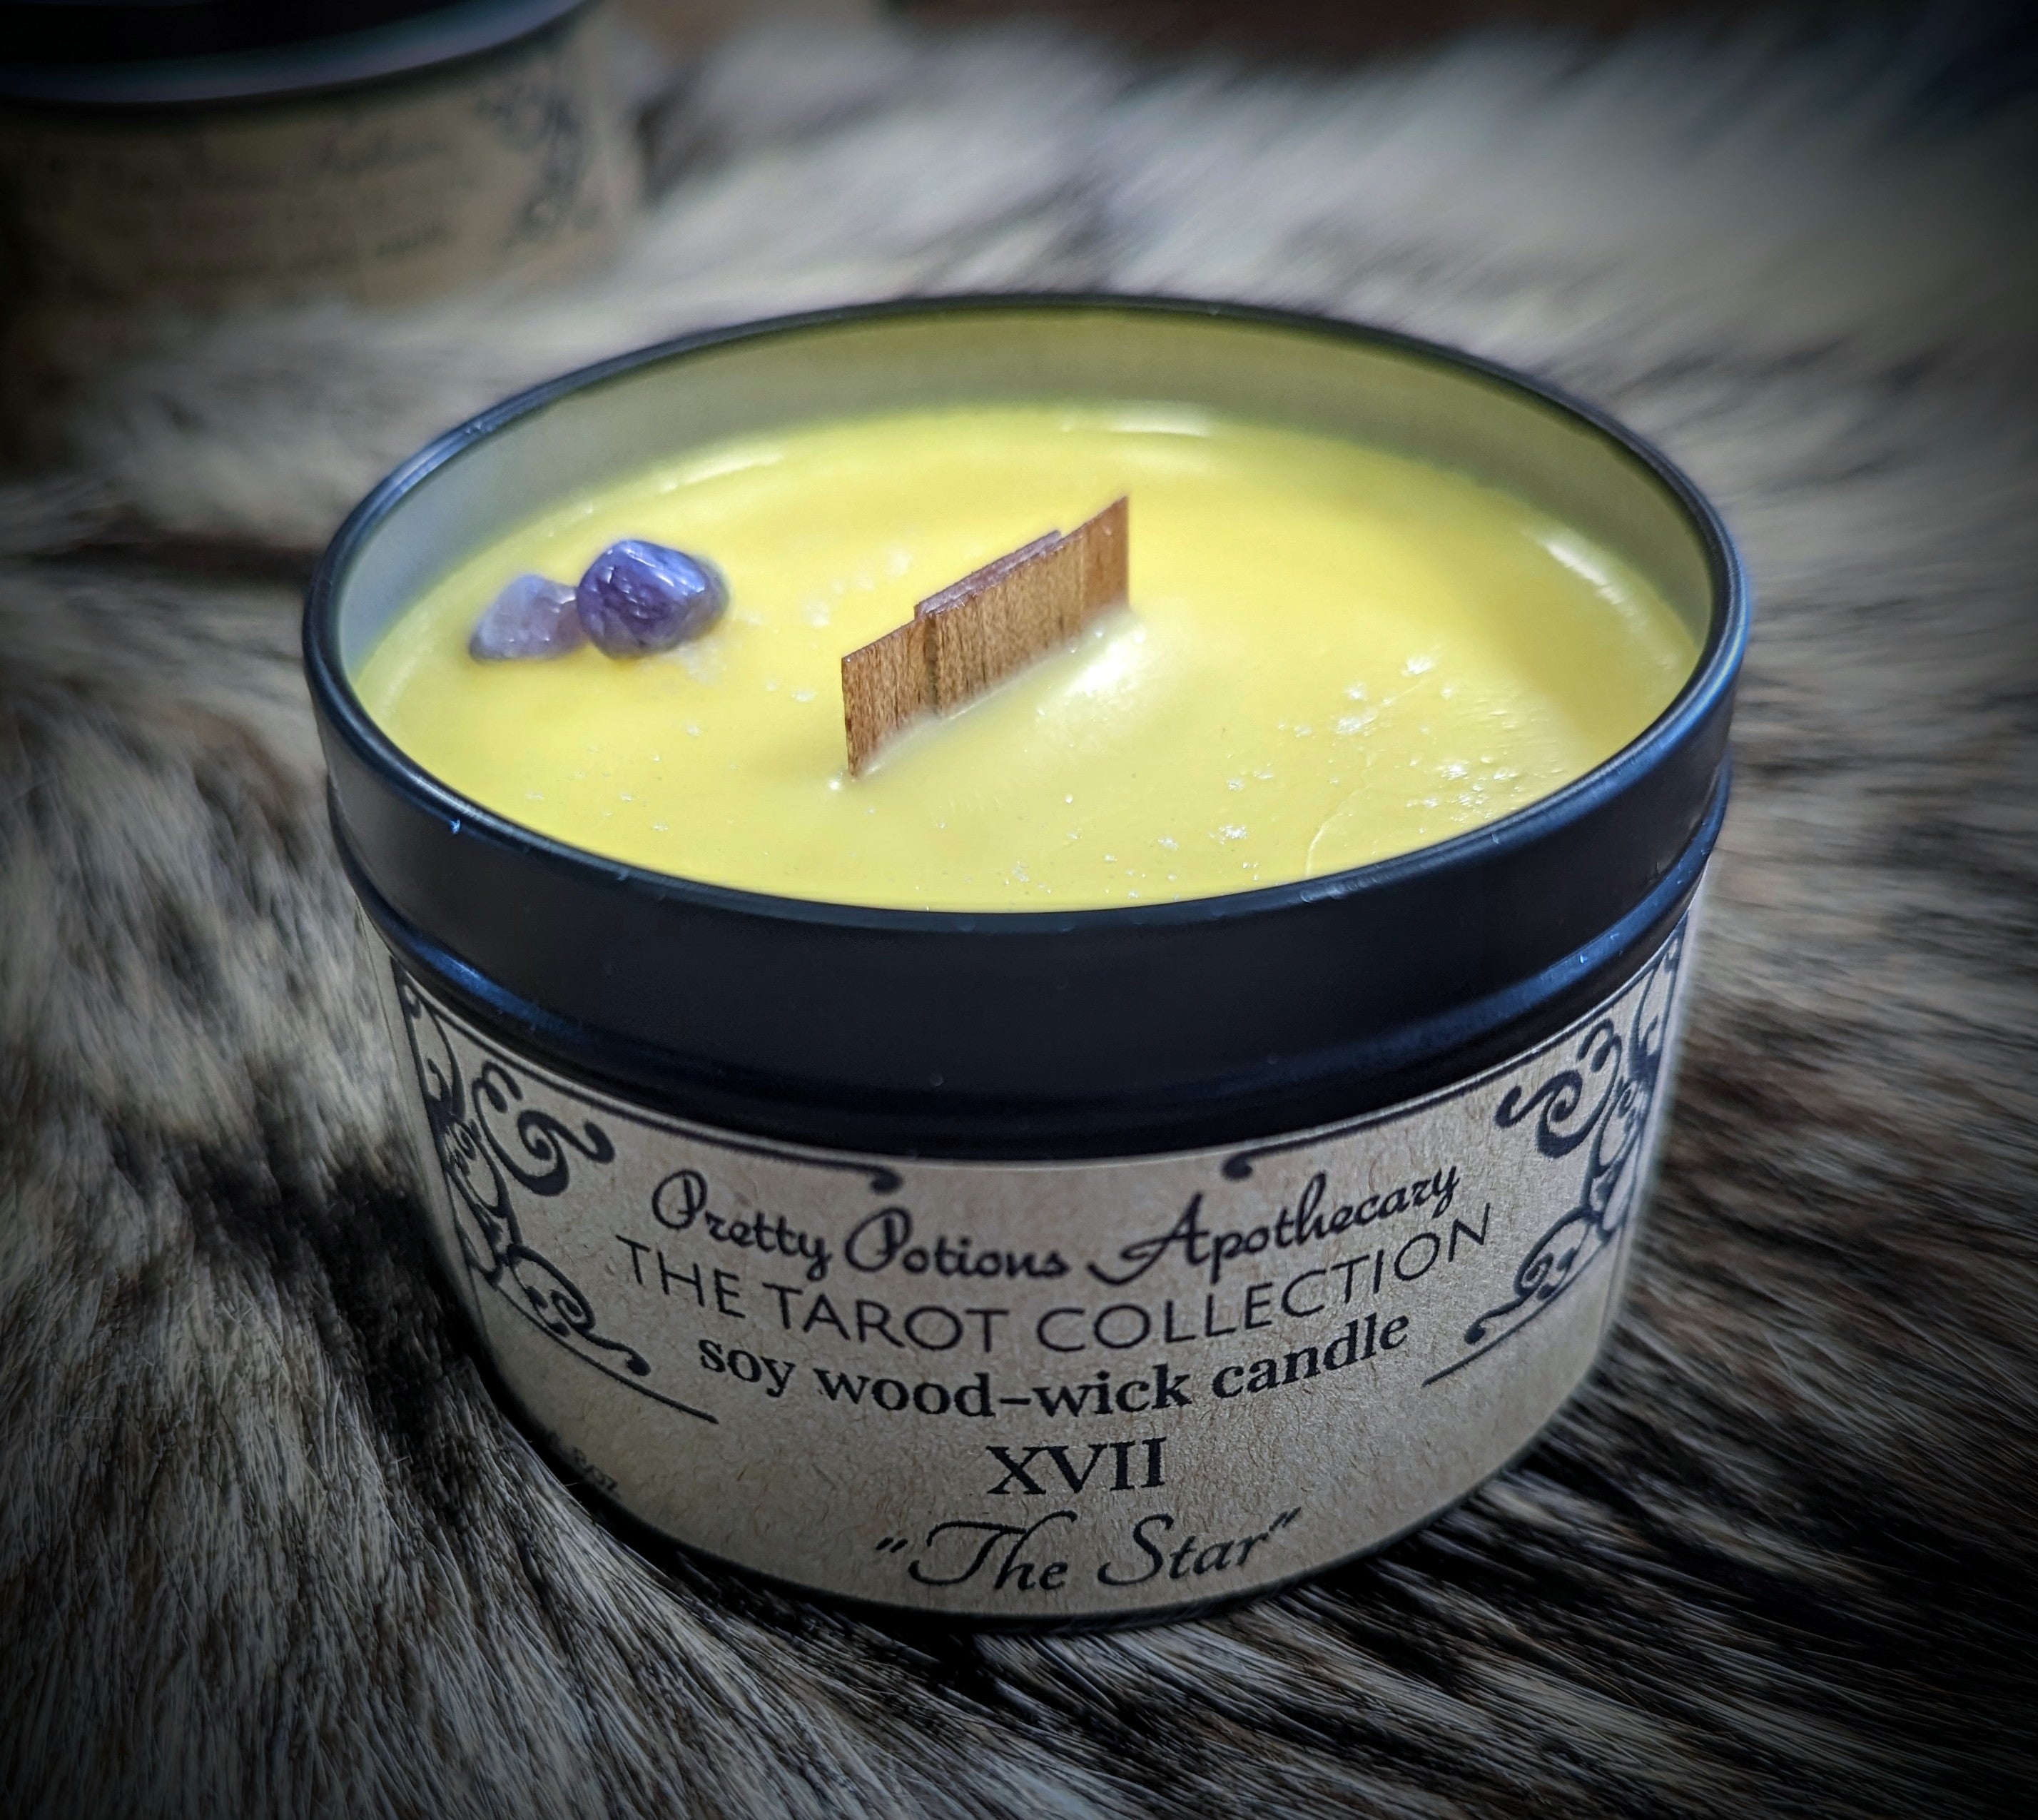 THE STAR Tarot Collection Candle